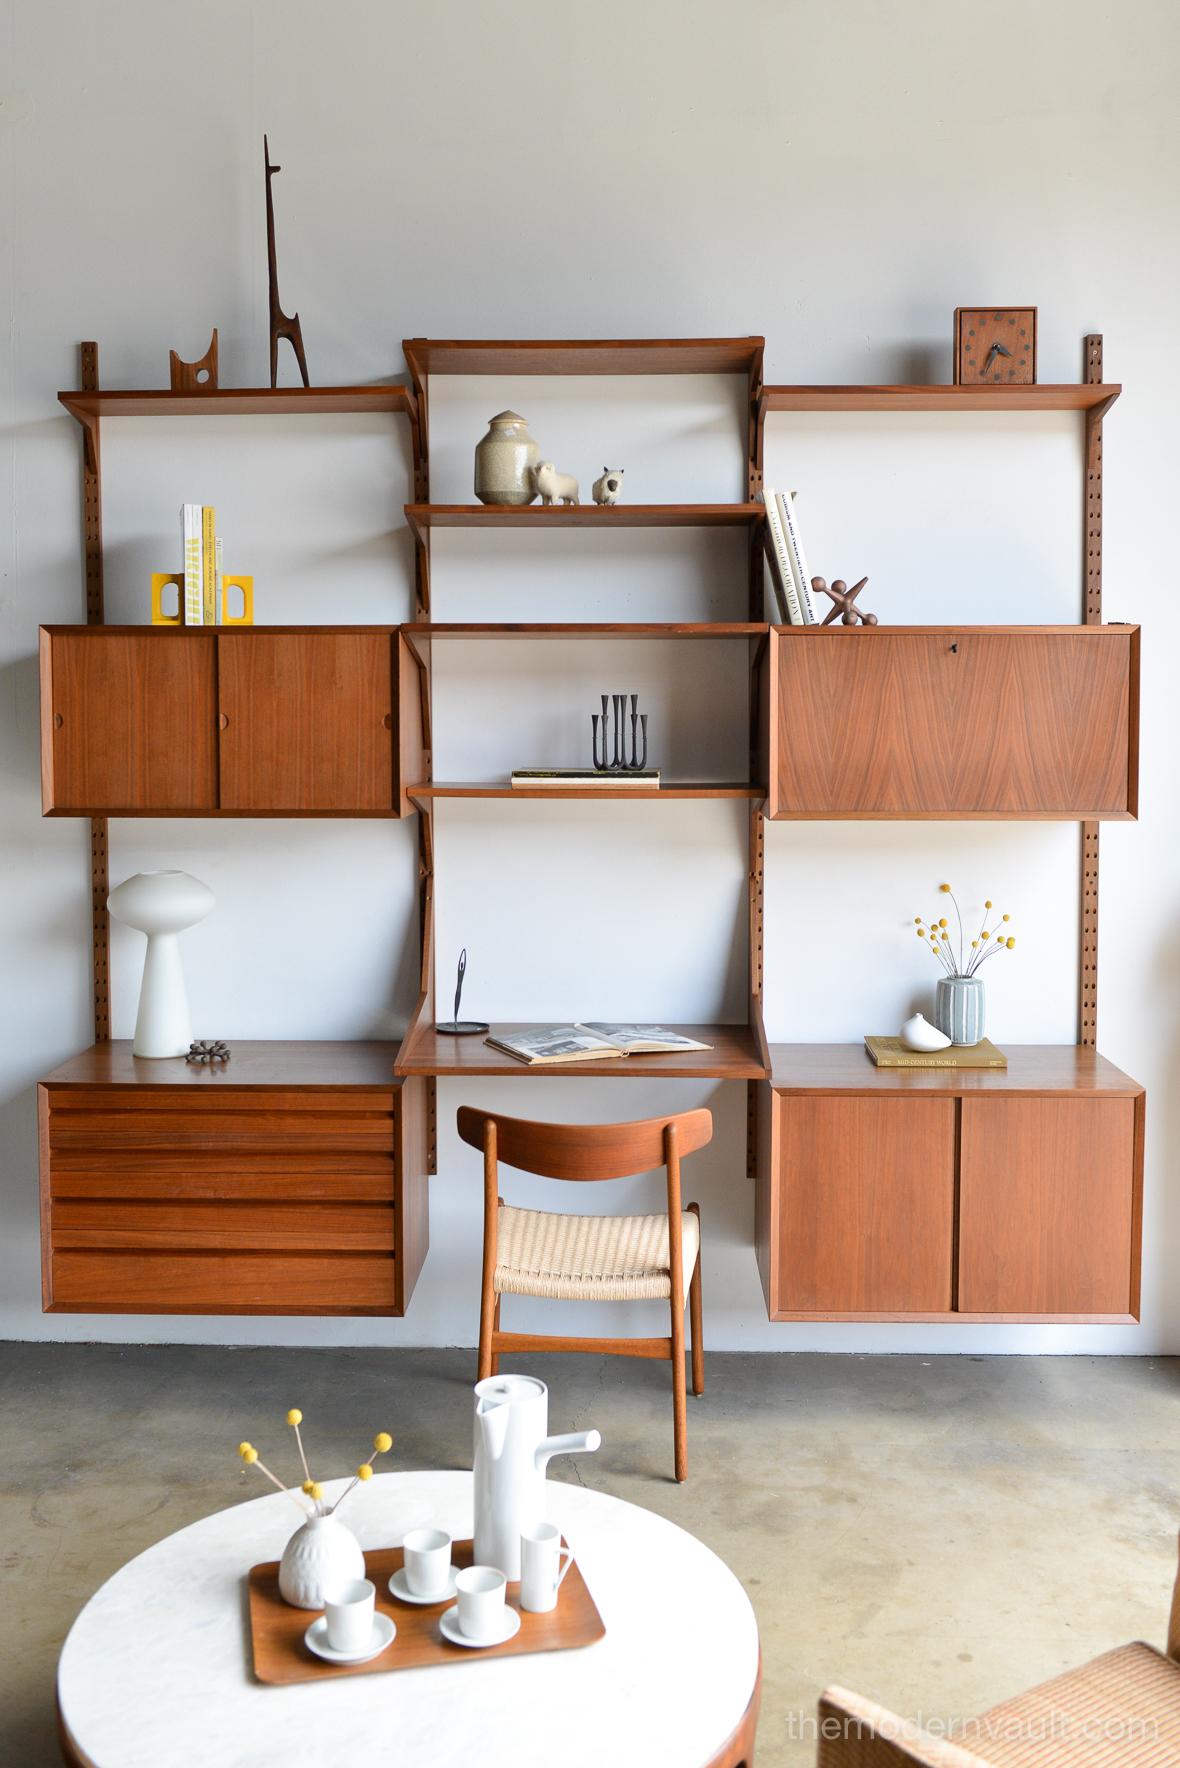 Walnut 3 bay wall unit by Poul Cadovius, Denmark 1970. Very good original condition includes all cabinets and shelves as shown: Very good original condition with only slight wear, unrestored. Marked Made in Denmark on back edges of all shelves and